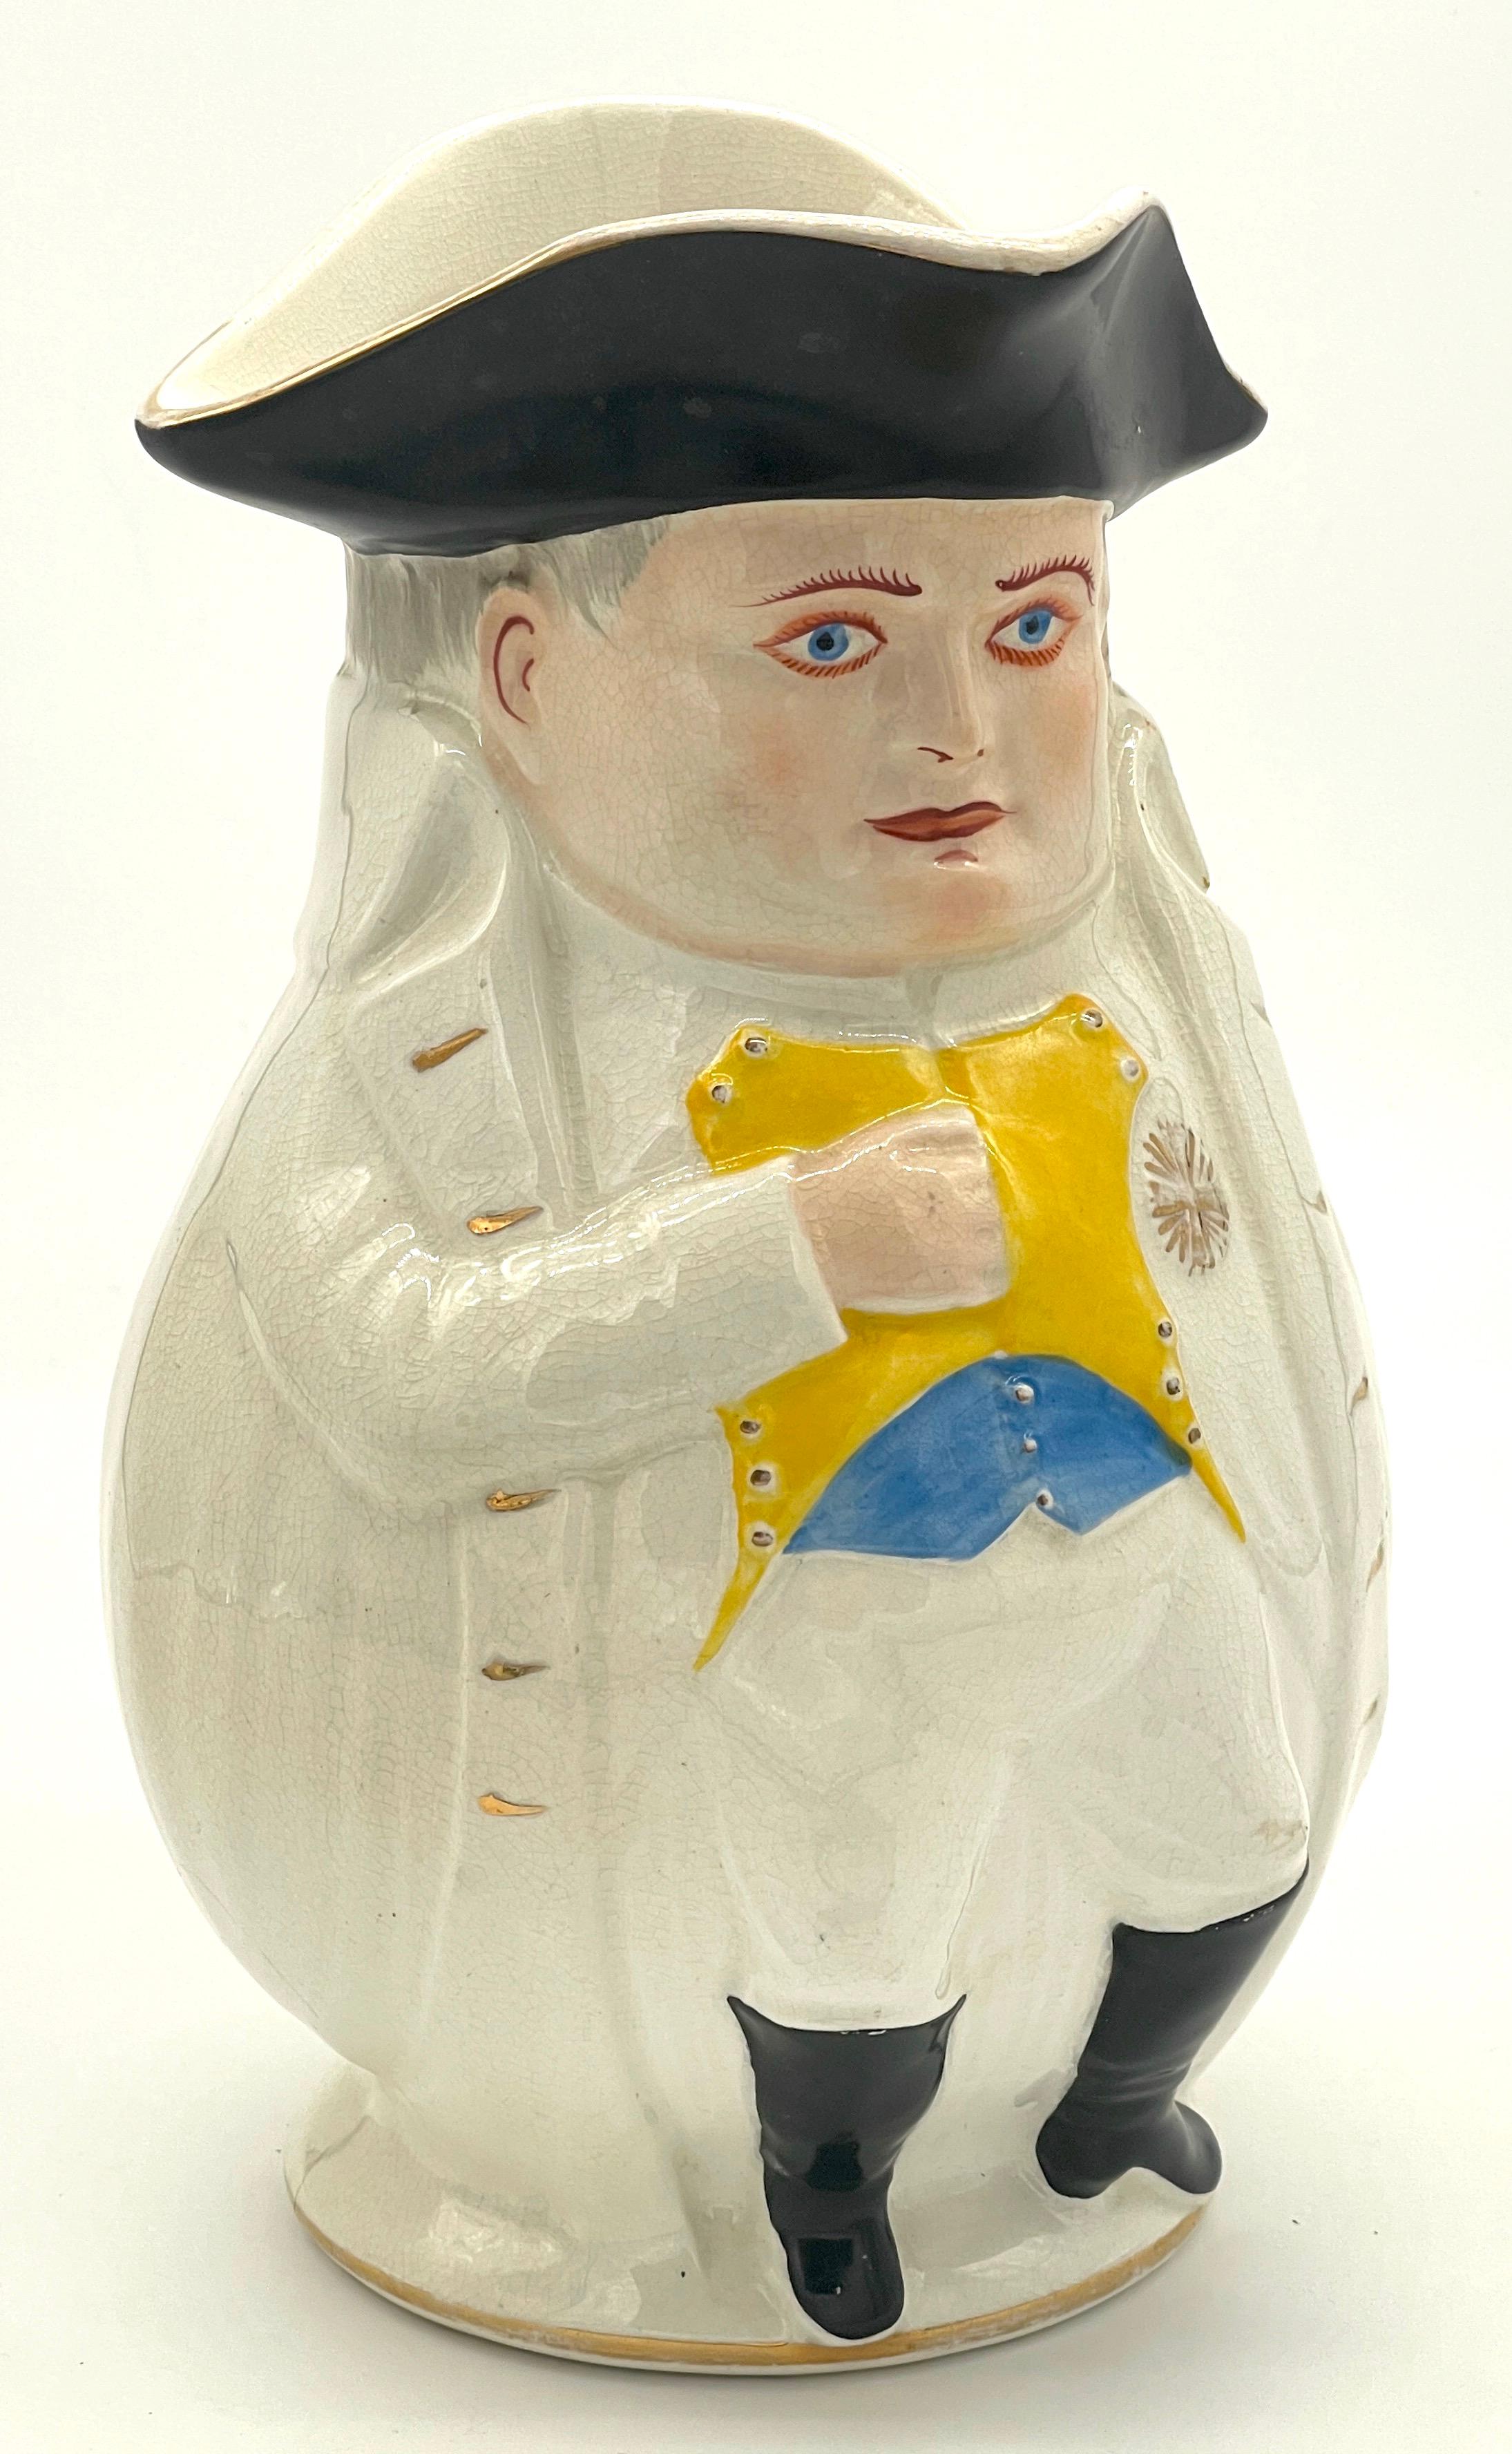 President William McKinley as Napoleon Large Toby Mug, by Morris & Willmore
Made by  Columbian Art Pottery / Morris and Willmore of Trenton, New Jersey
This model was made in sizes from 4.5-inches high to 11-inches high.
Retailed and/or decorated by